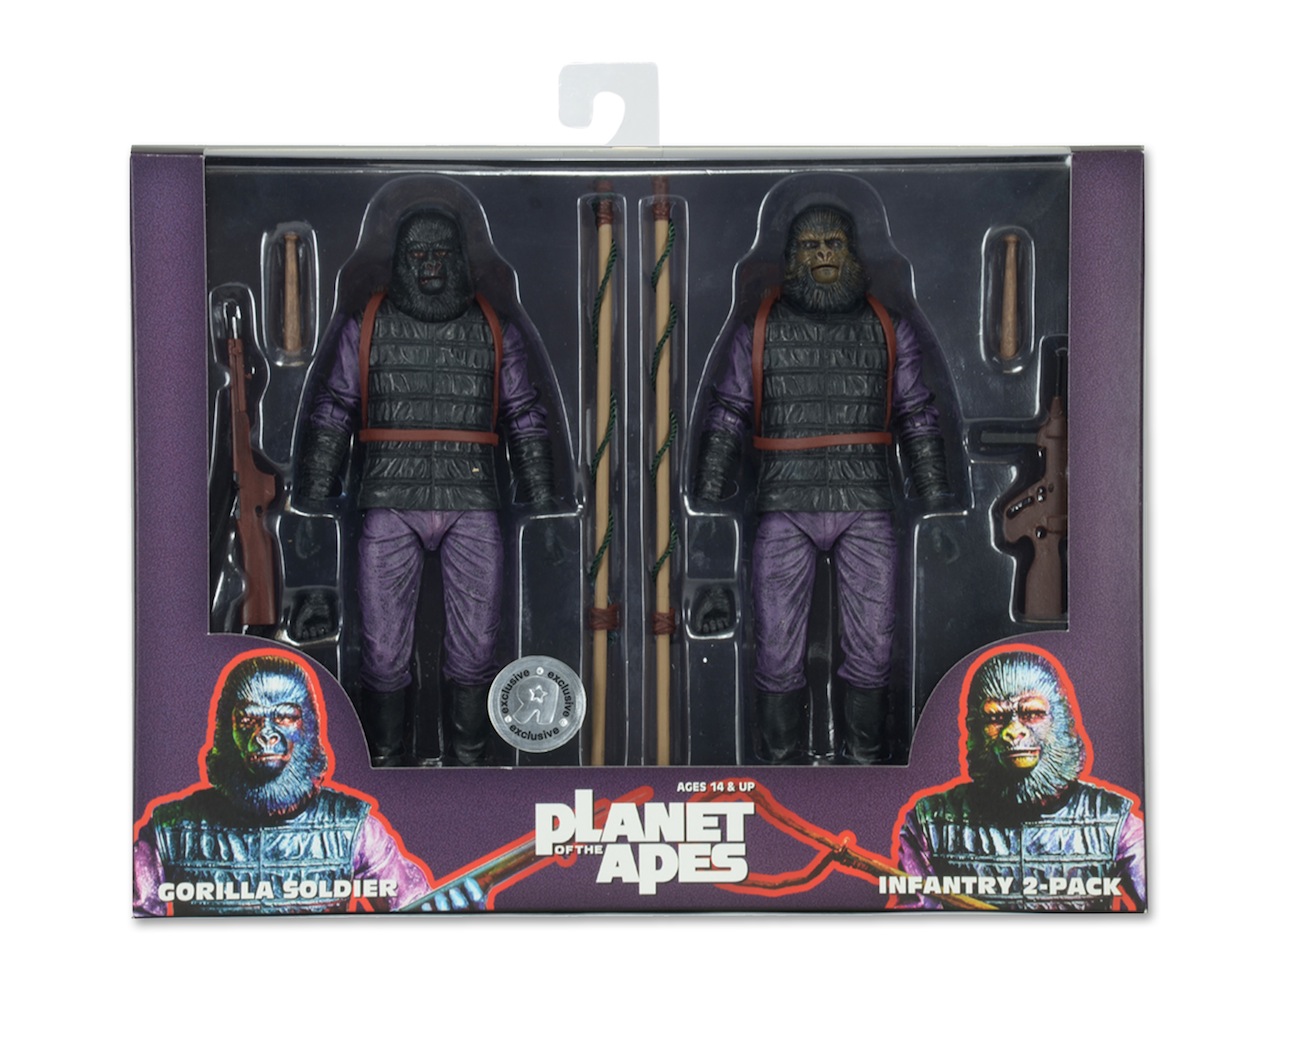 NECA PLANET OF THE APES INFANTRY 2 PACK GORILLA SOLDIERS 7" ACTION FIGURES 